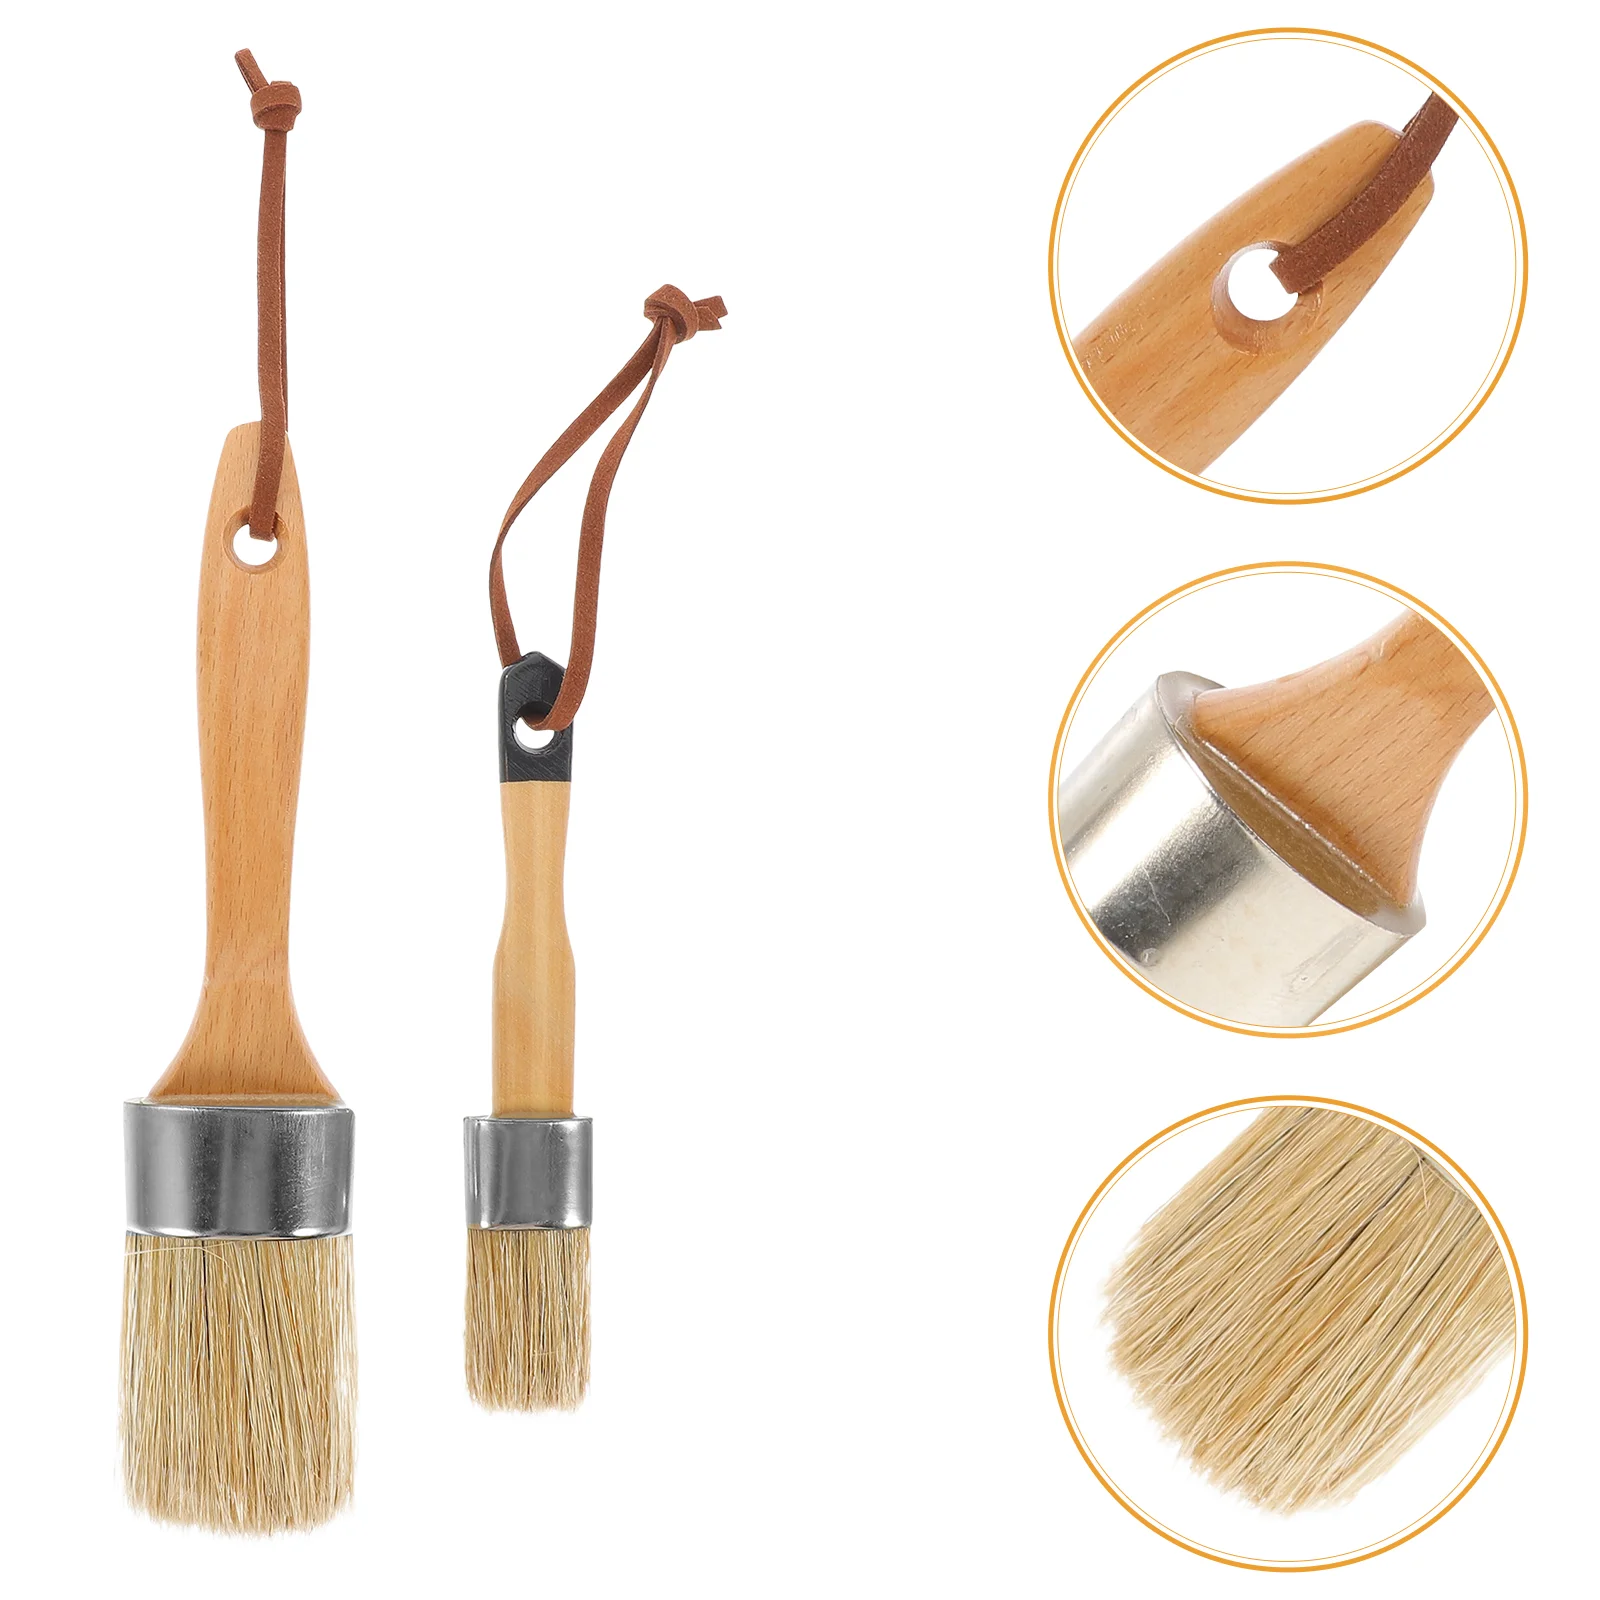 

2 Pcs Wall Paint Brushes Walls Stain Wood Wooden Handle Bristles Wallpaper